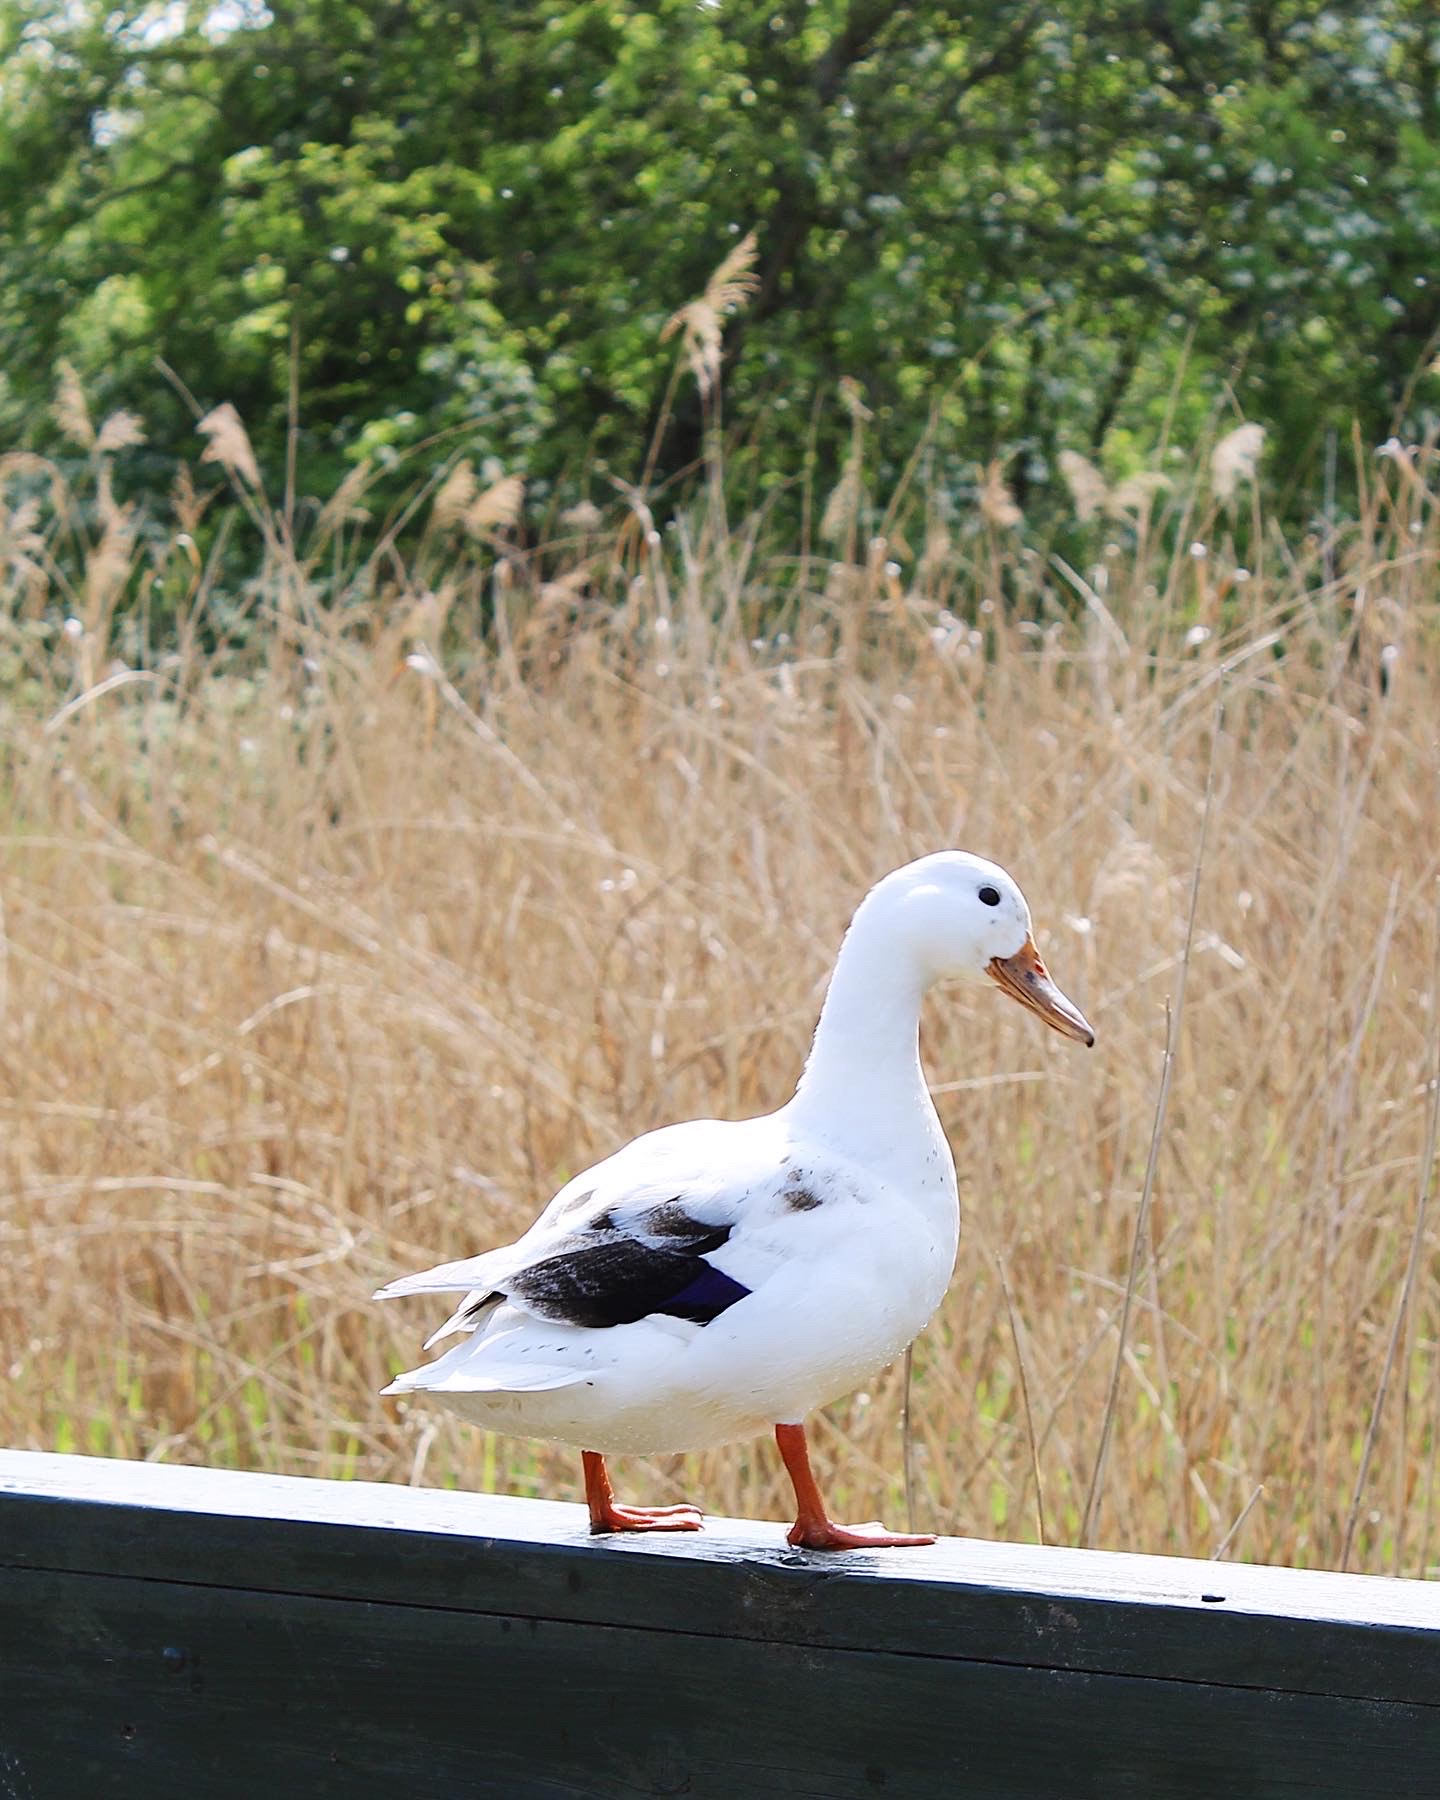 A white and black duck perched on a fence in front of reeds.